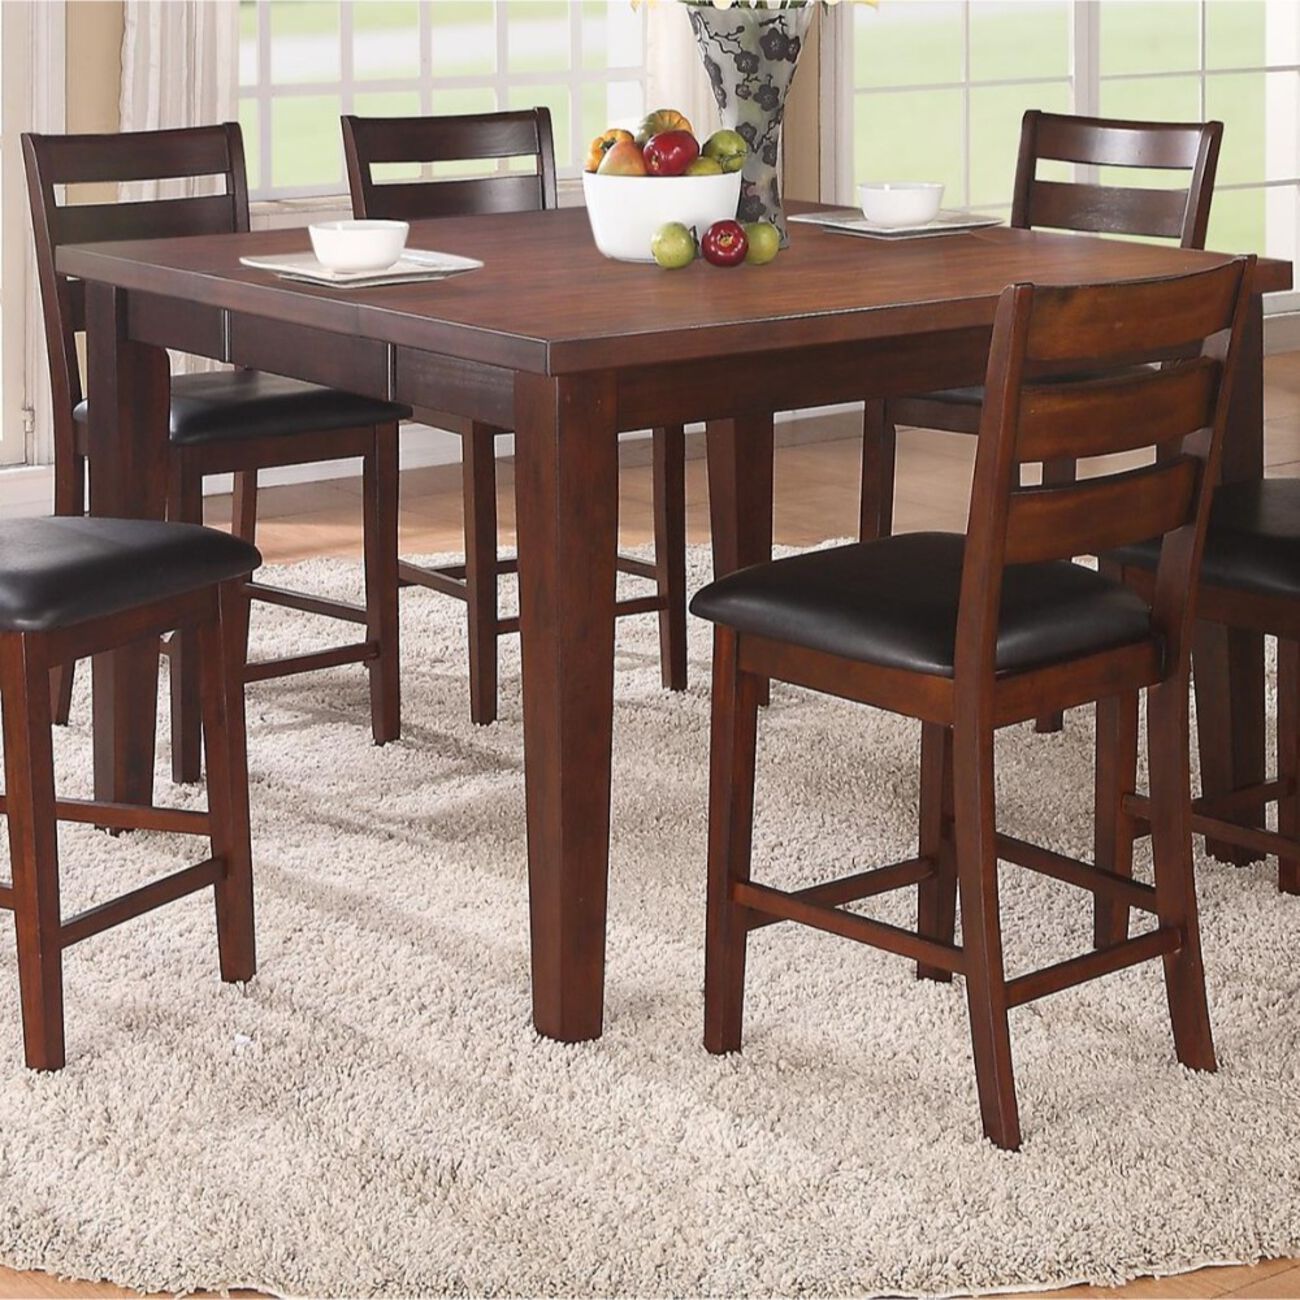 Solid Wood Counter Height Table With Sturdy Legs, Brown